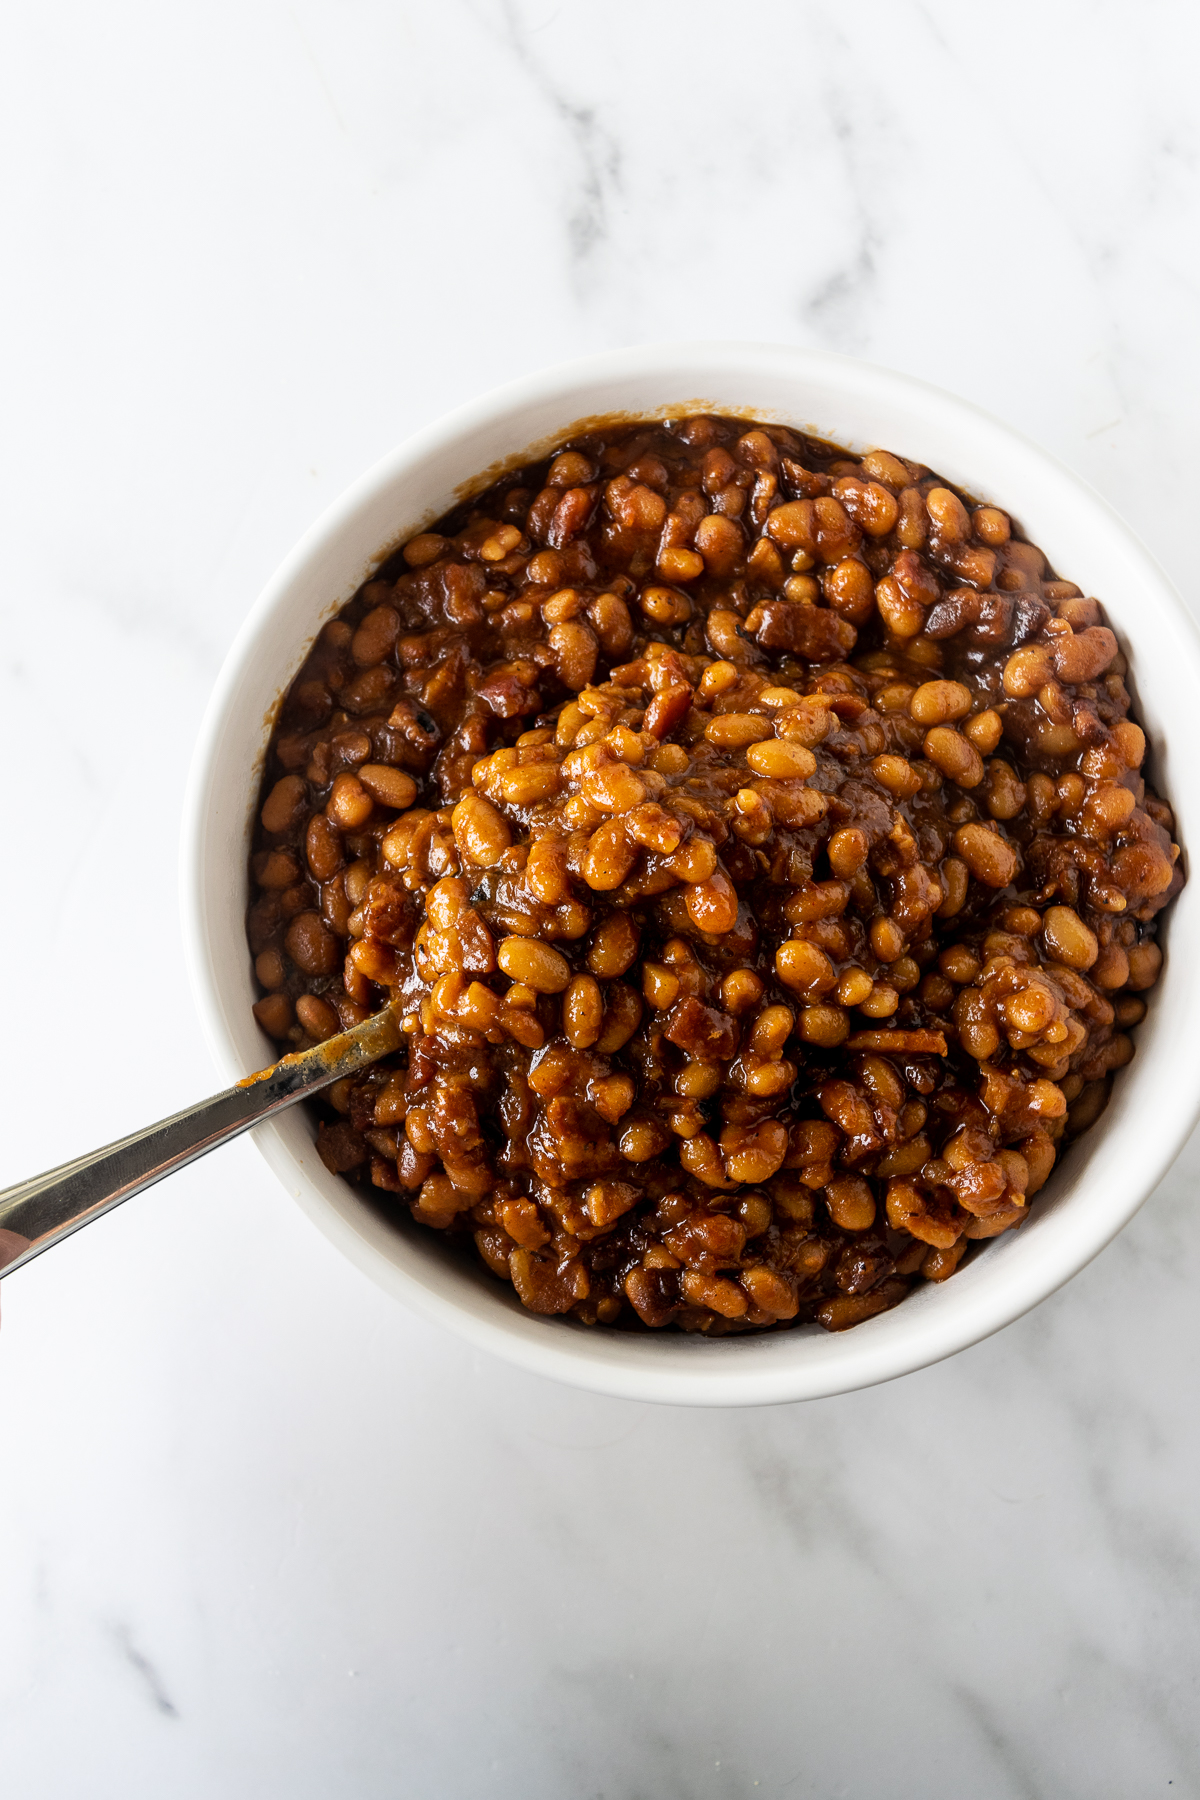 baked beans recipe in a white bowl with a spoon.